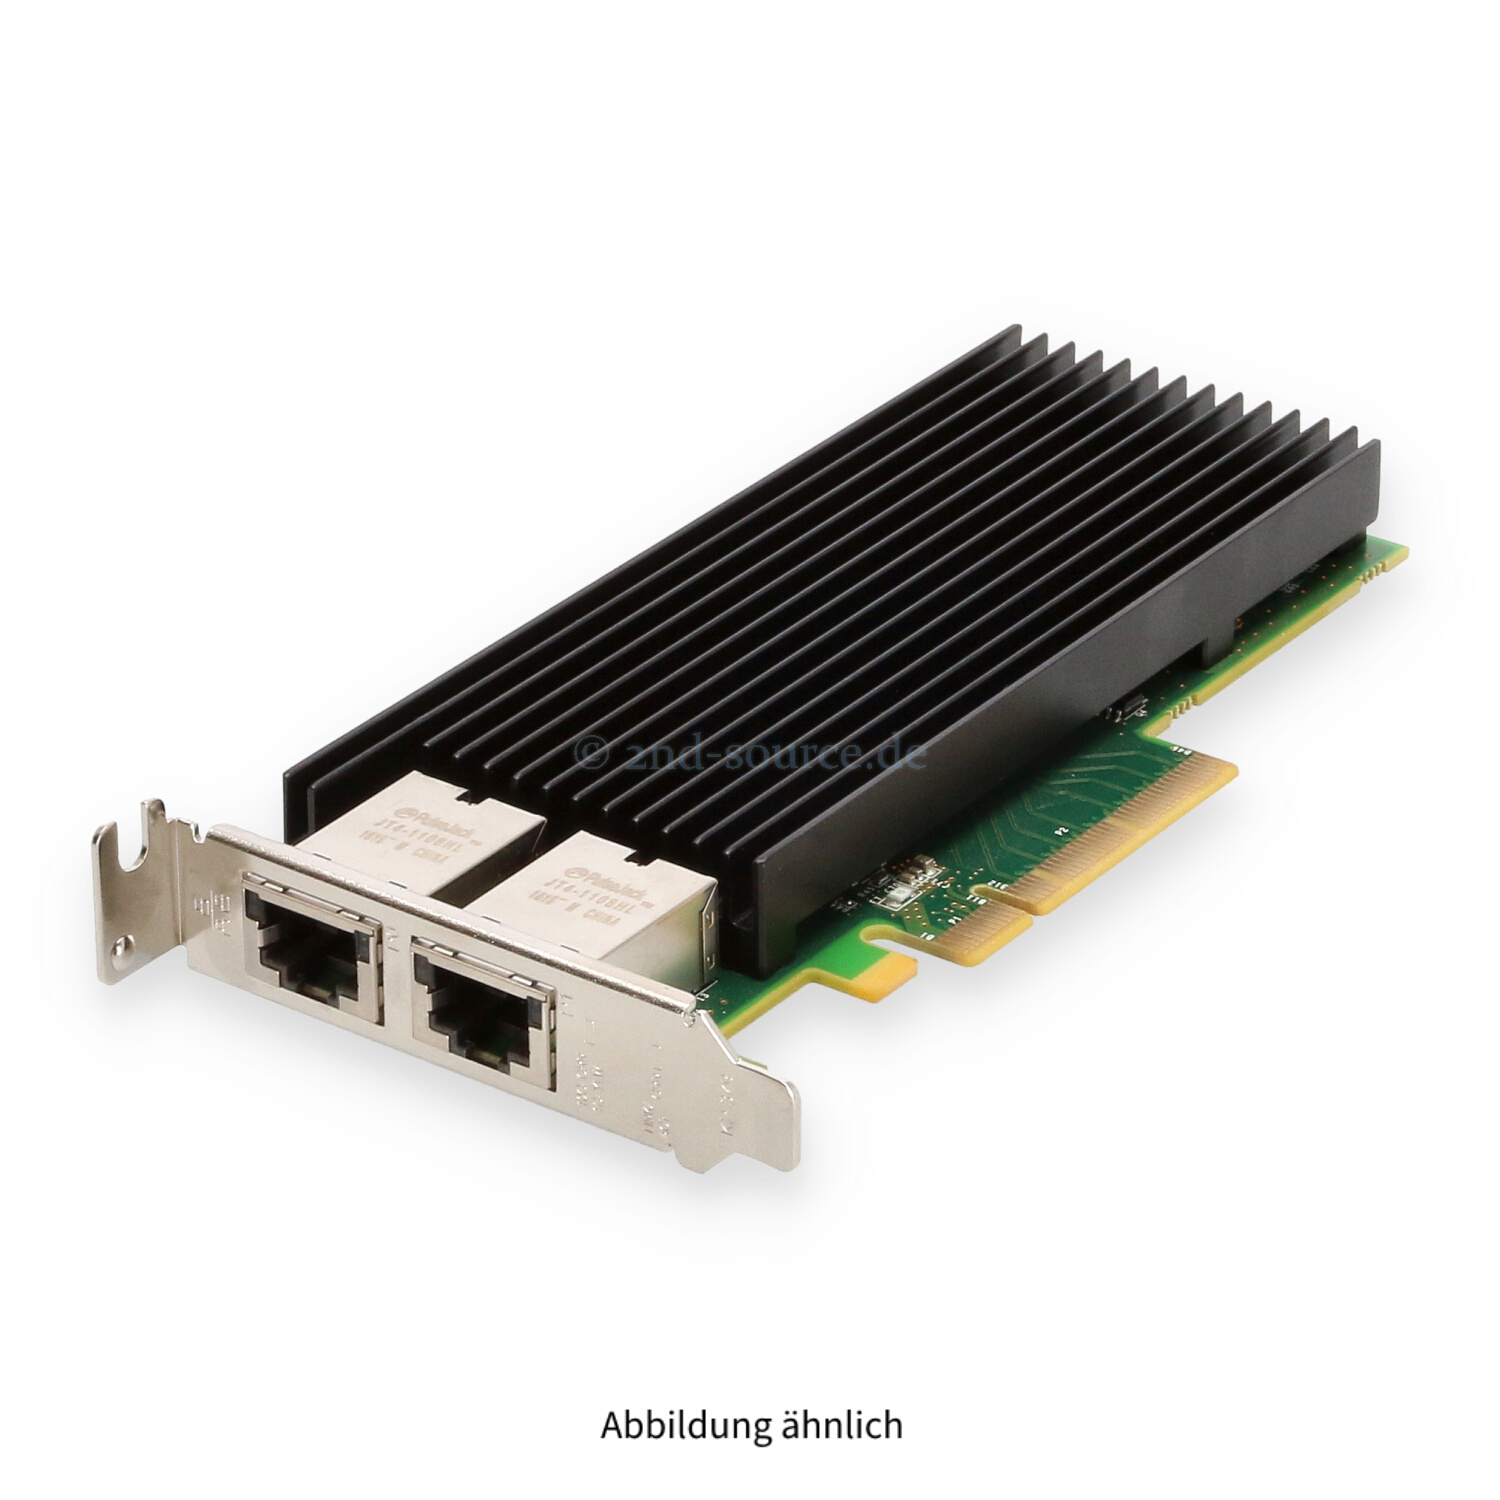 Silicom 2x 10GBase-T PCIe x8 Server Ethernet Adapter Low Profile PE210G2I40-T